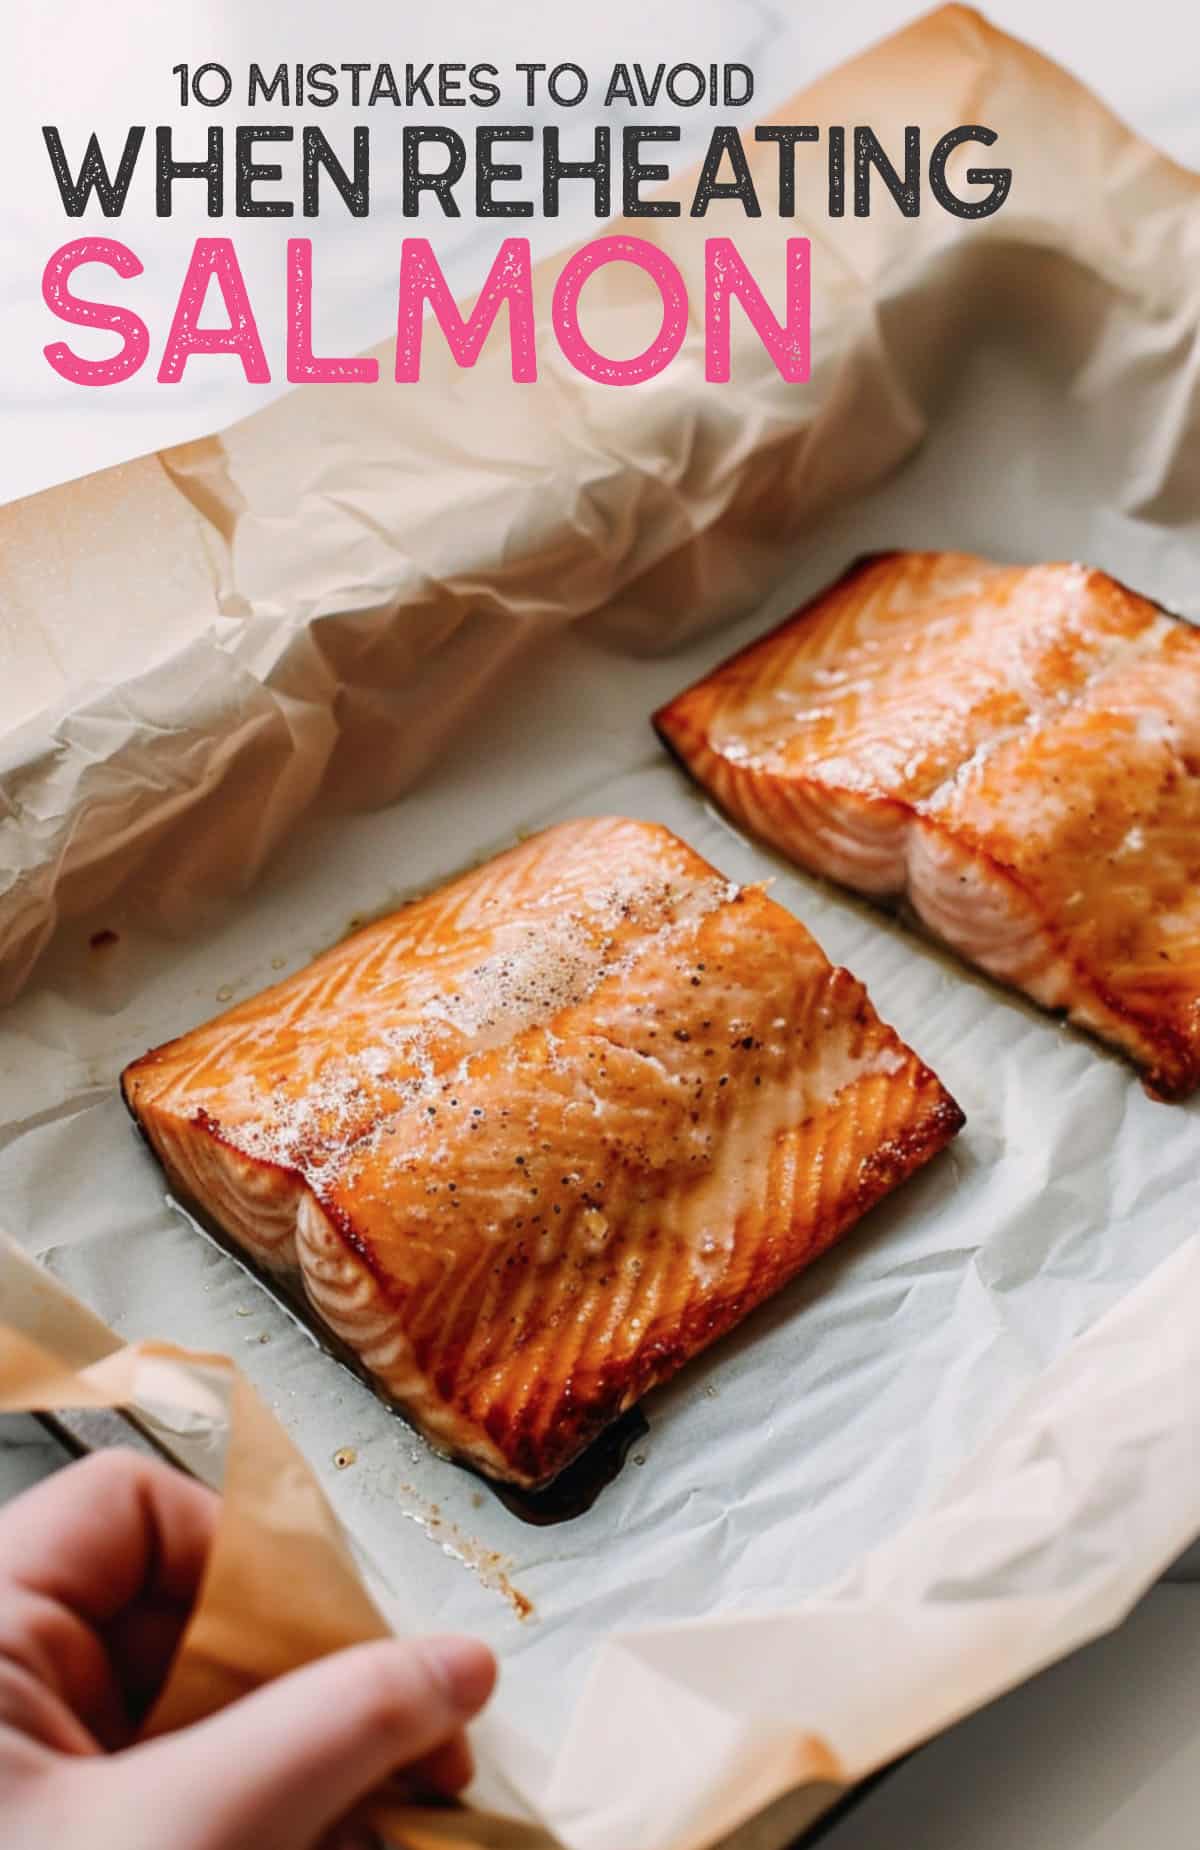 Image about reheating salmon: mistakes to avoid and tips for the best results.